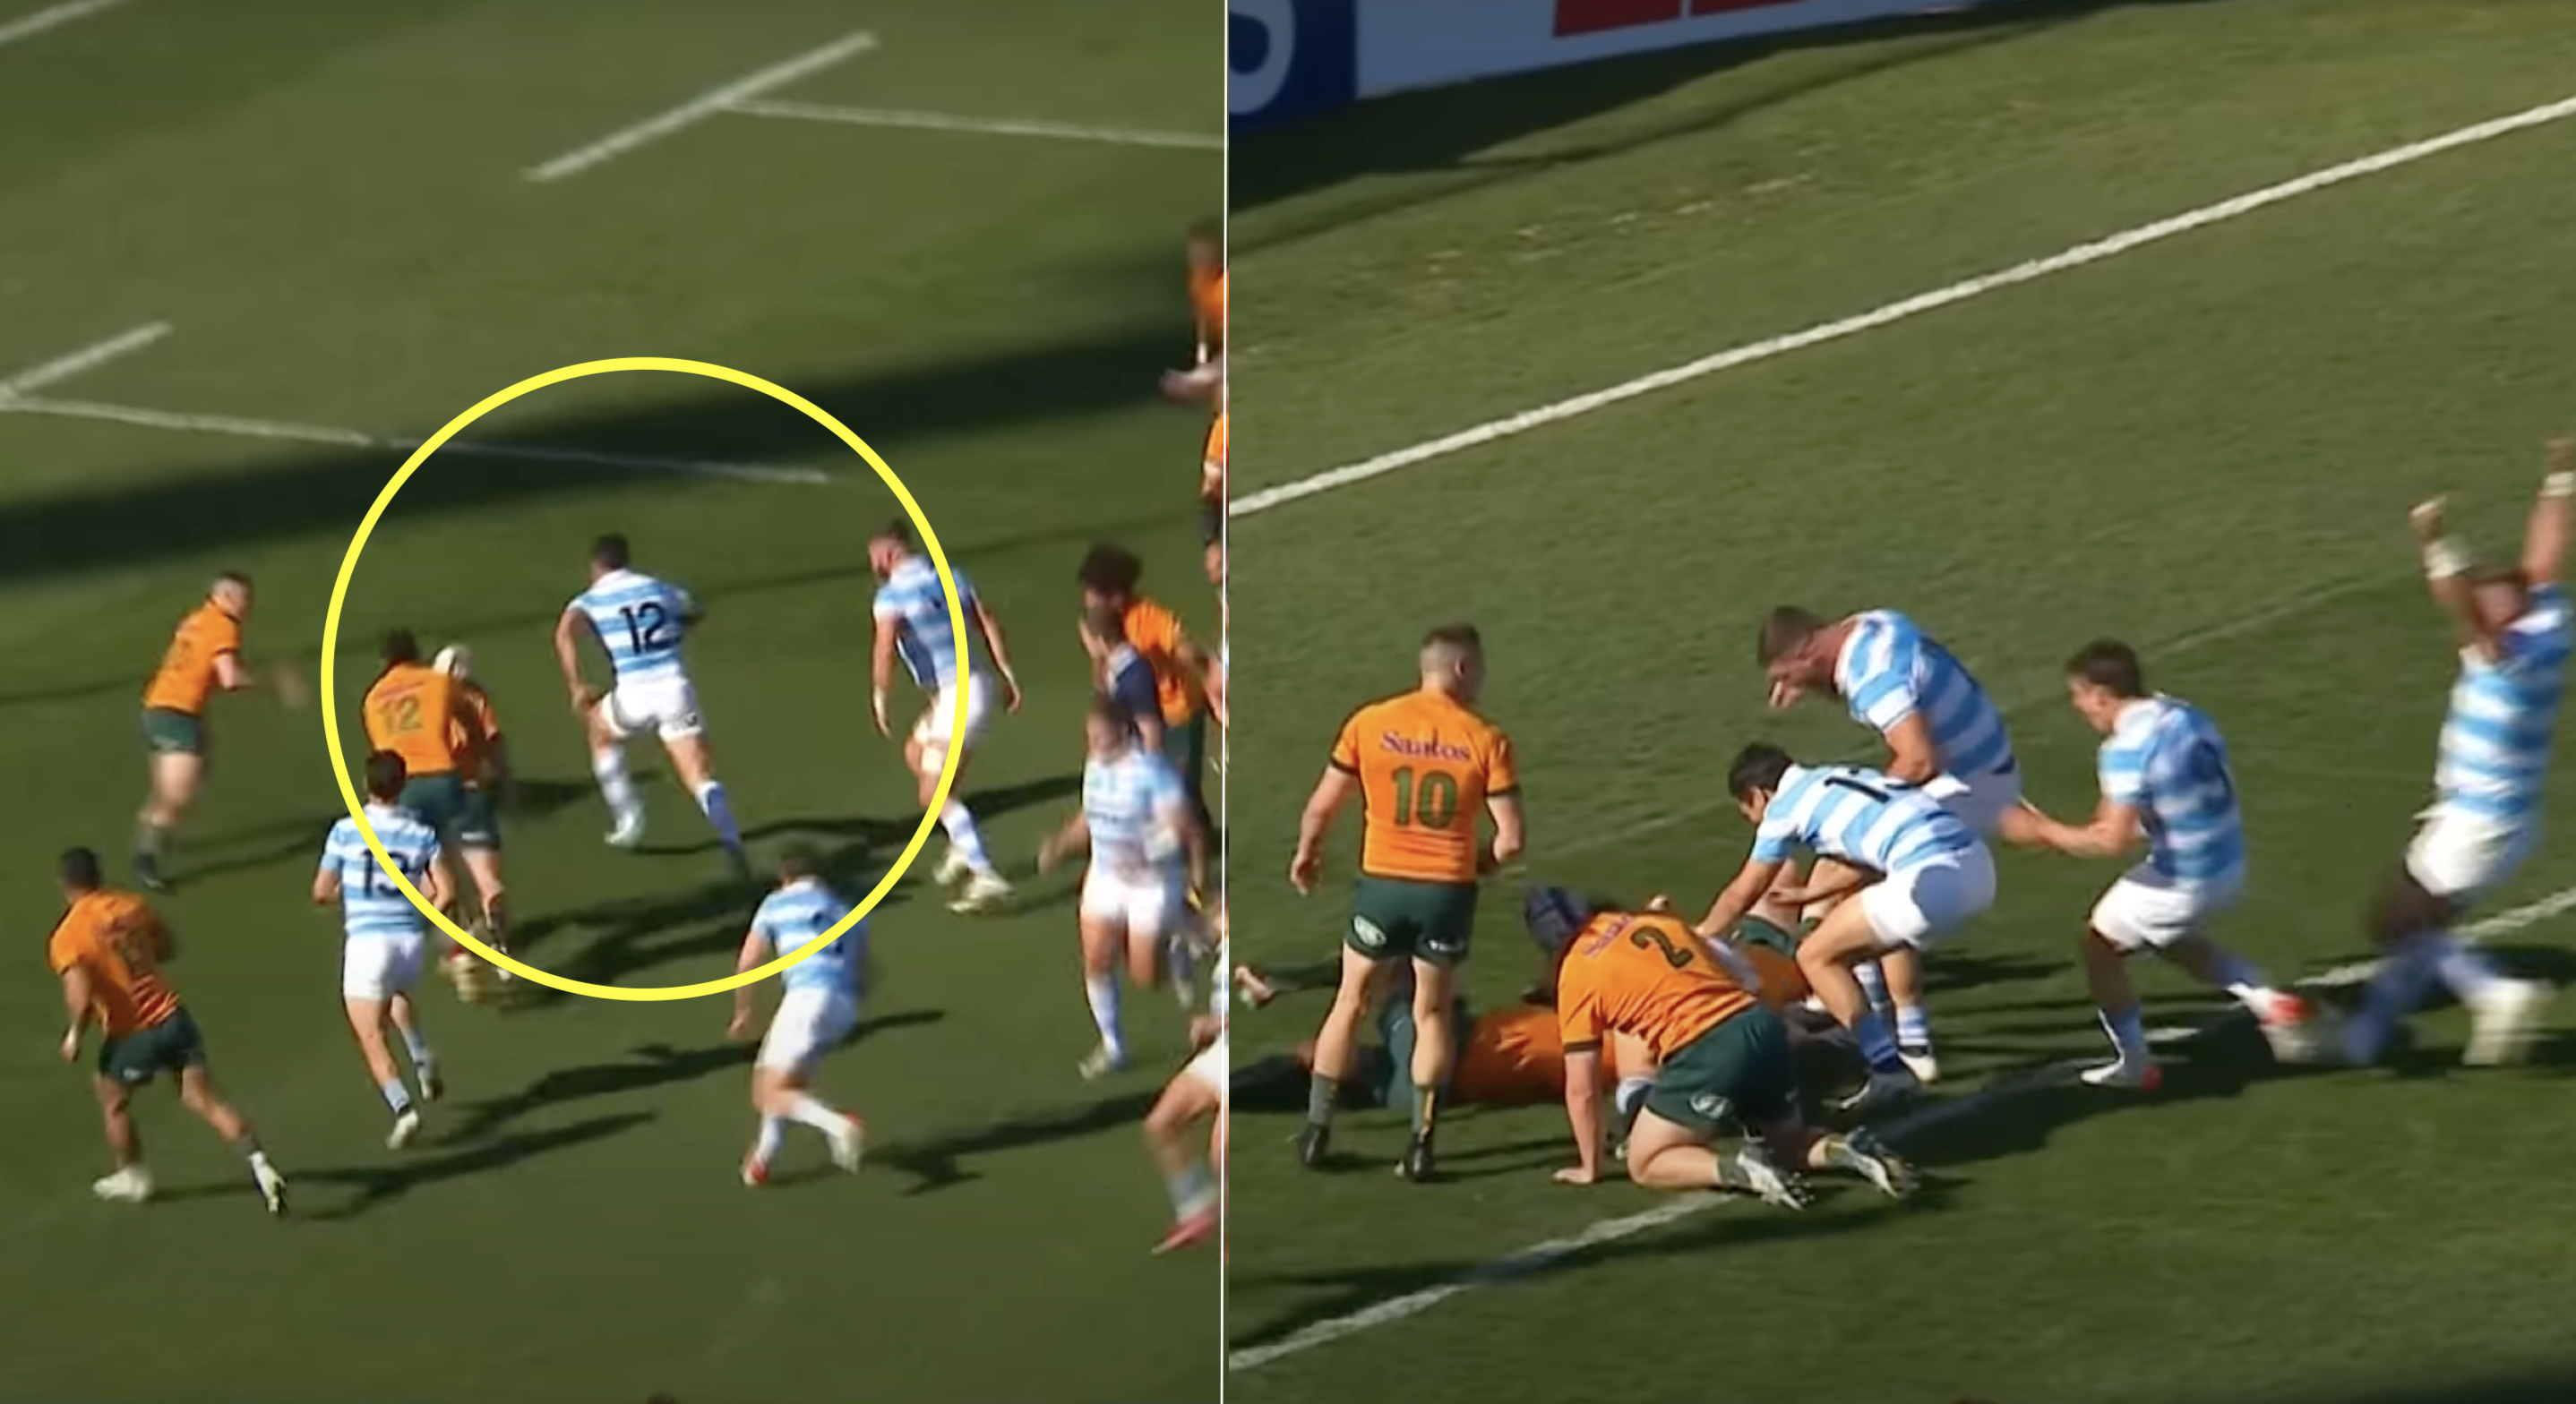 Wallabies get sold the strangest dummy of all time